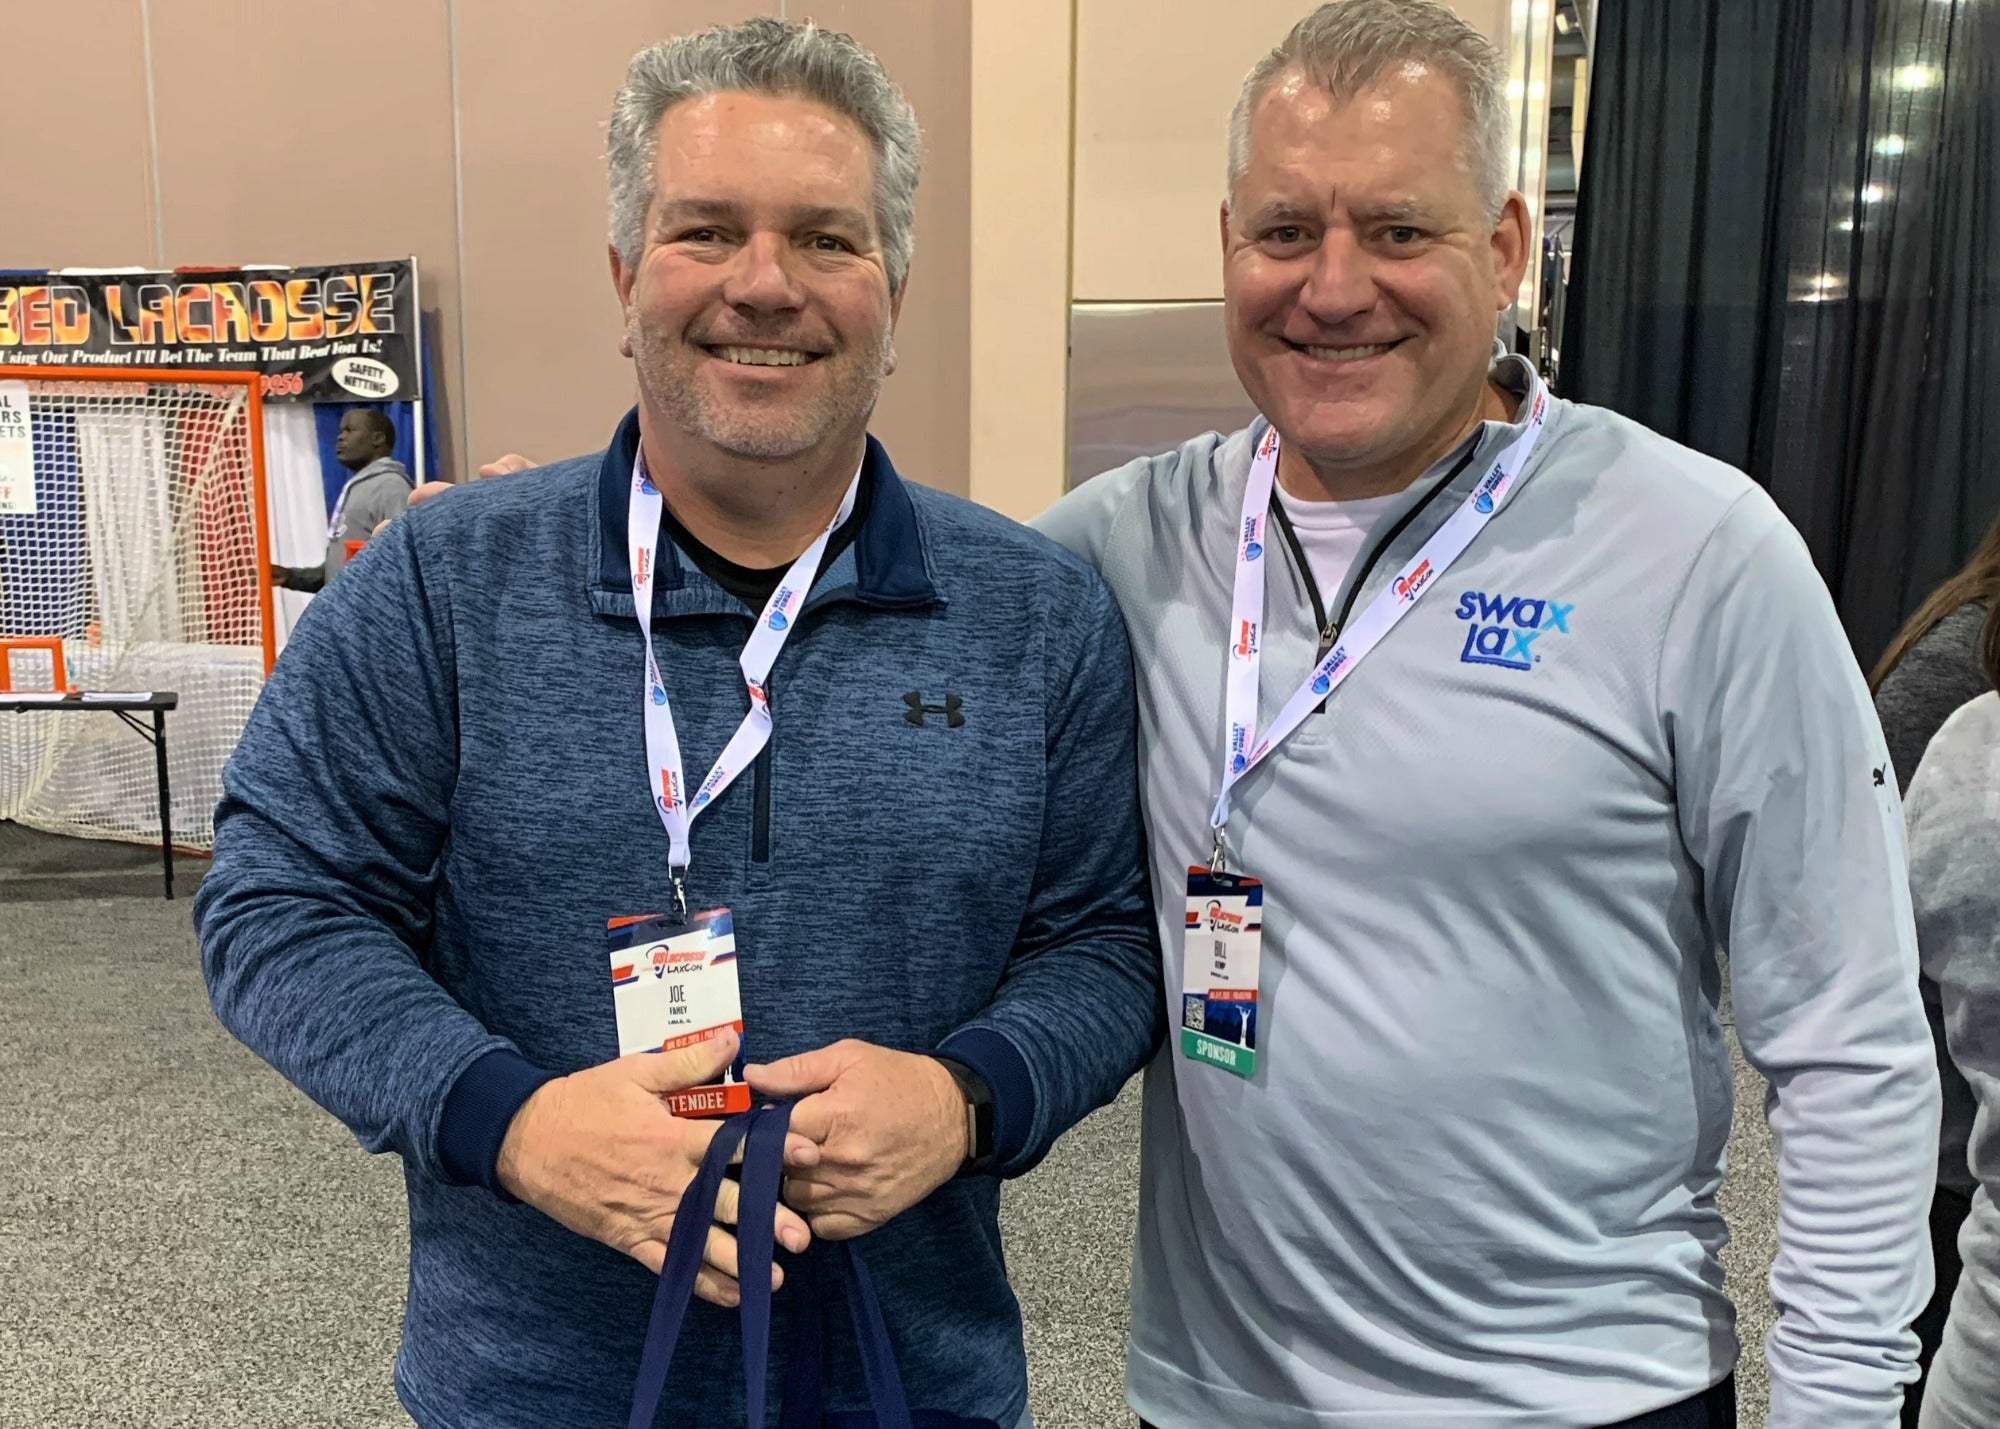 Joe - Friday 2020 winner of our Swax Lax LaxCon giveaway bundle